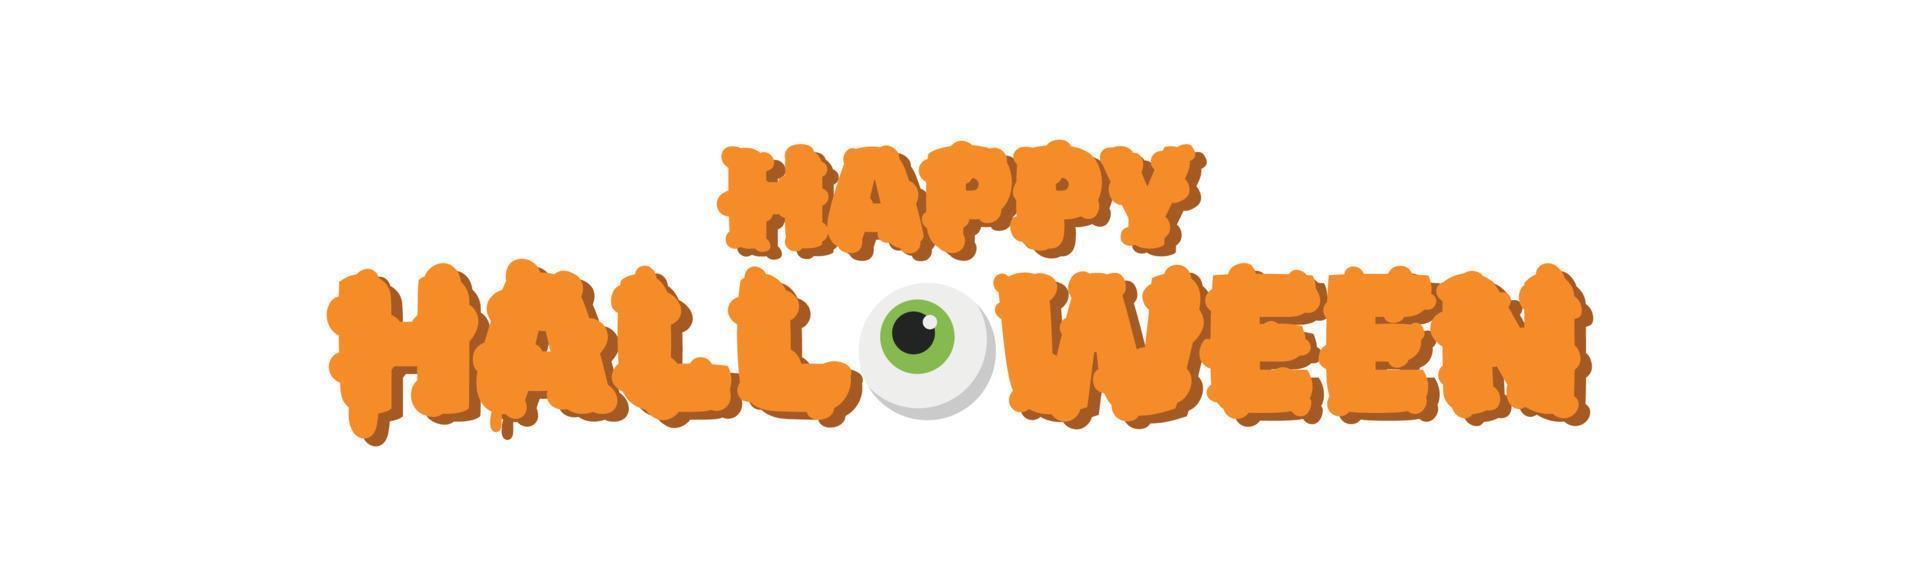 Congratulations on the holiday of the dead, happy Halloween - Vector